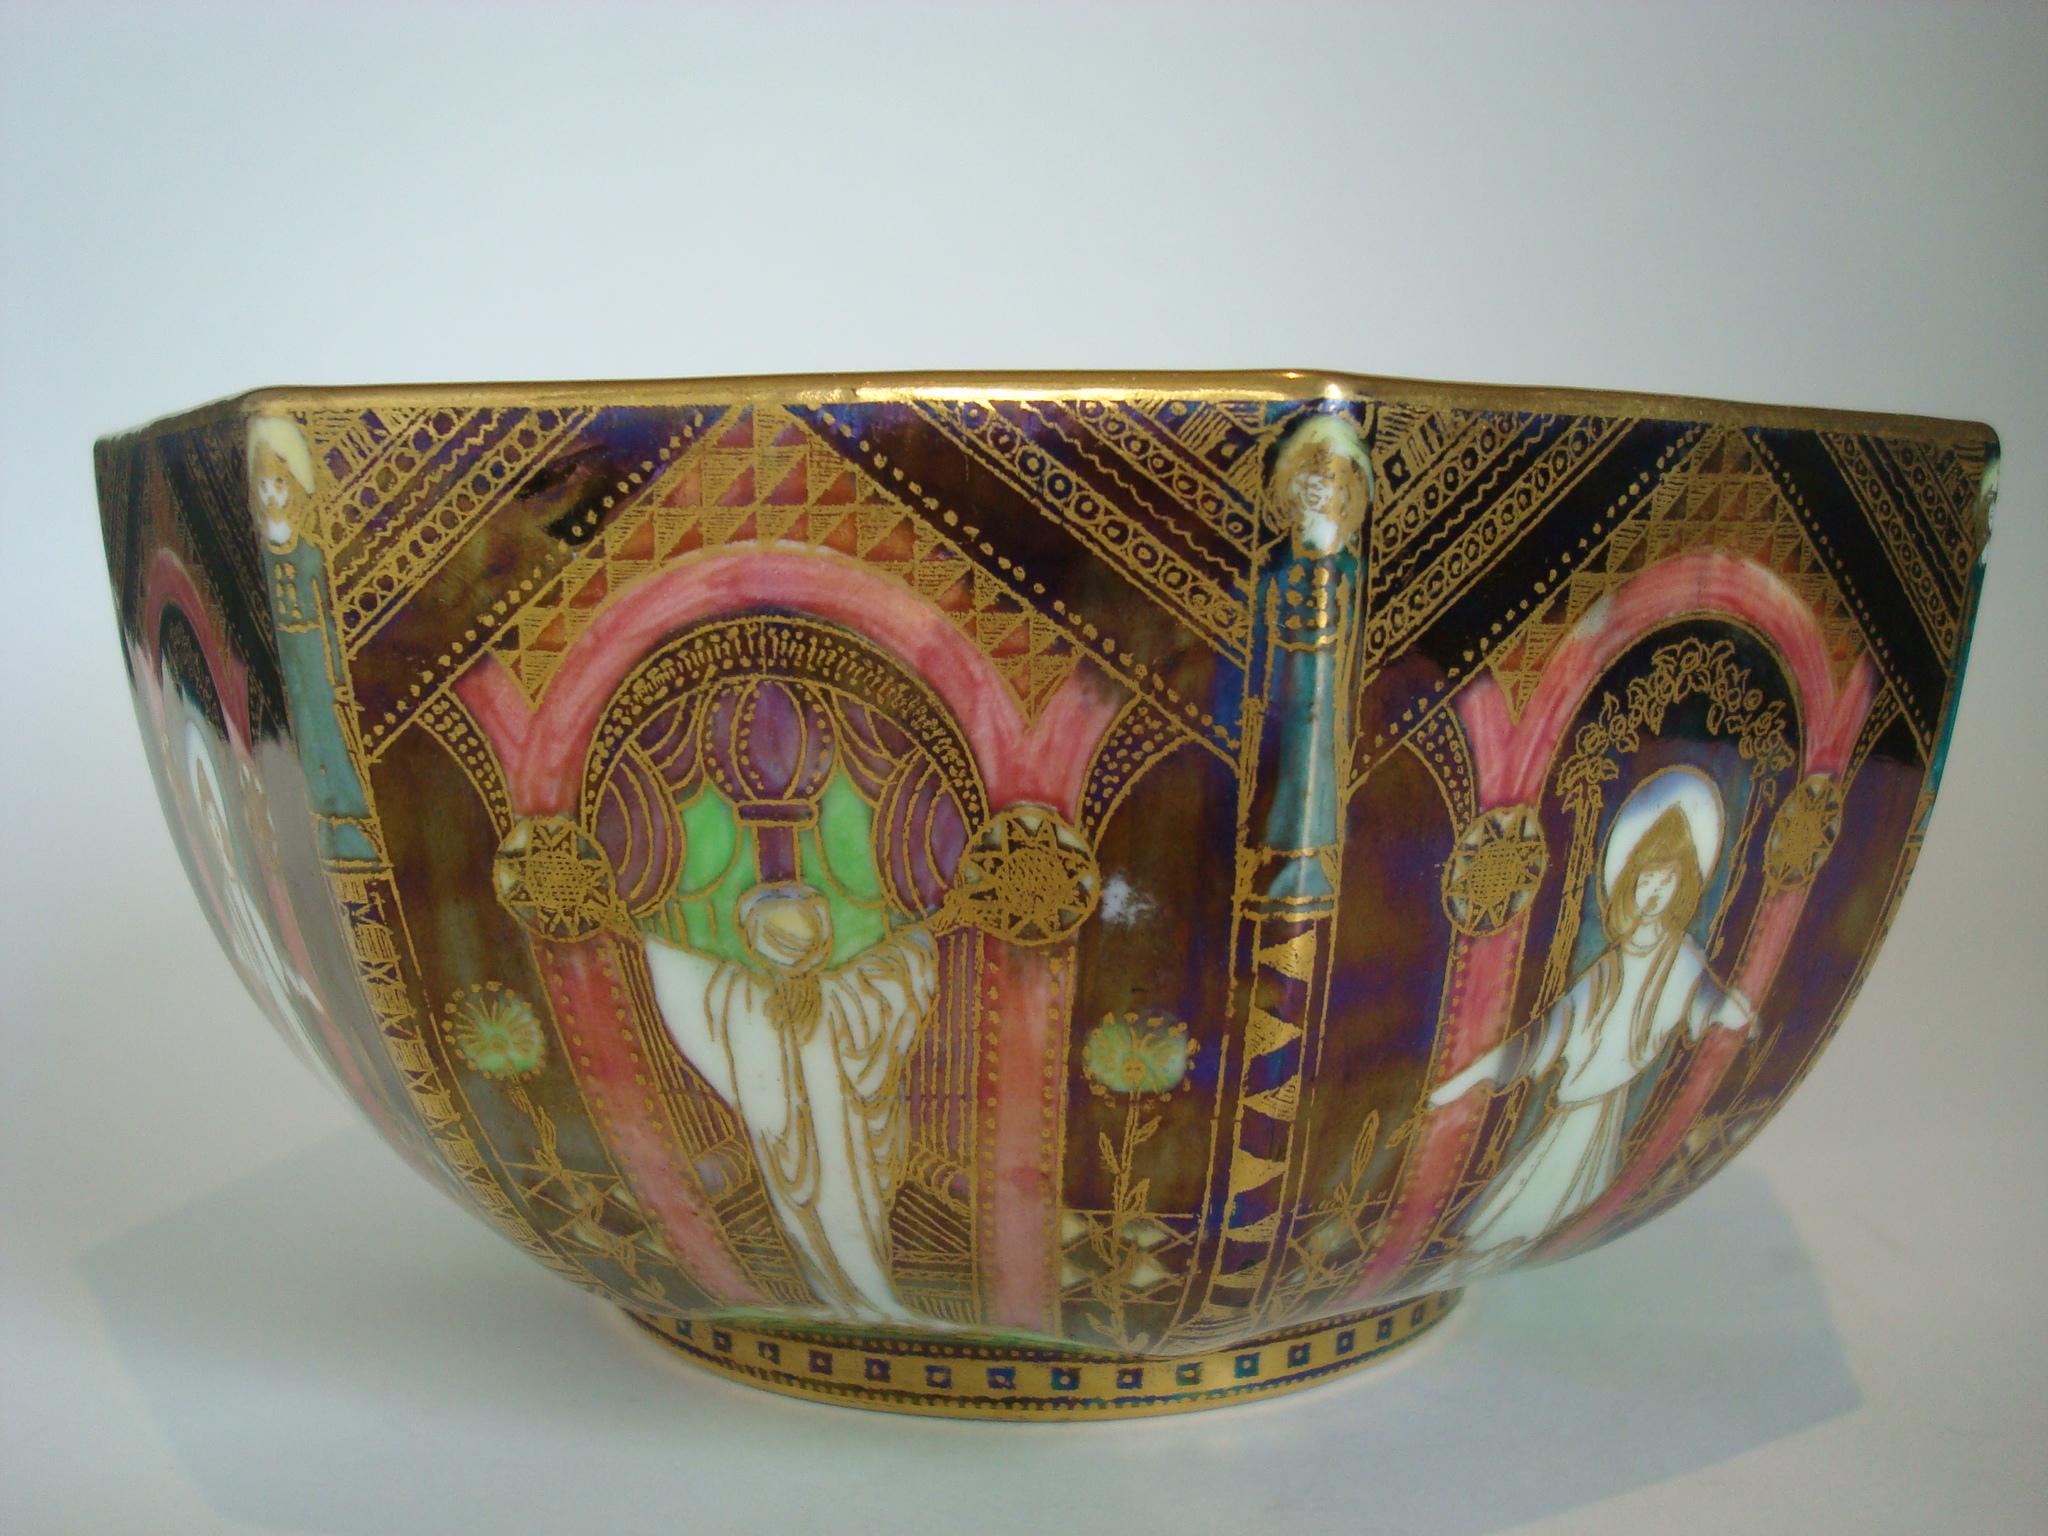 An octagonal Fairyland Lustre bowl, decorated with Angel or Geisha pattern. Designed by Daisy Makeig-Jones.
Wedgwood Fairyland Lustre octagonal bowl, England, c. 1920, pattern Z4968. 
Bowl is in very good conditions.
Marked Wedgwood Z4968 England.